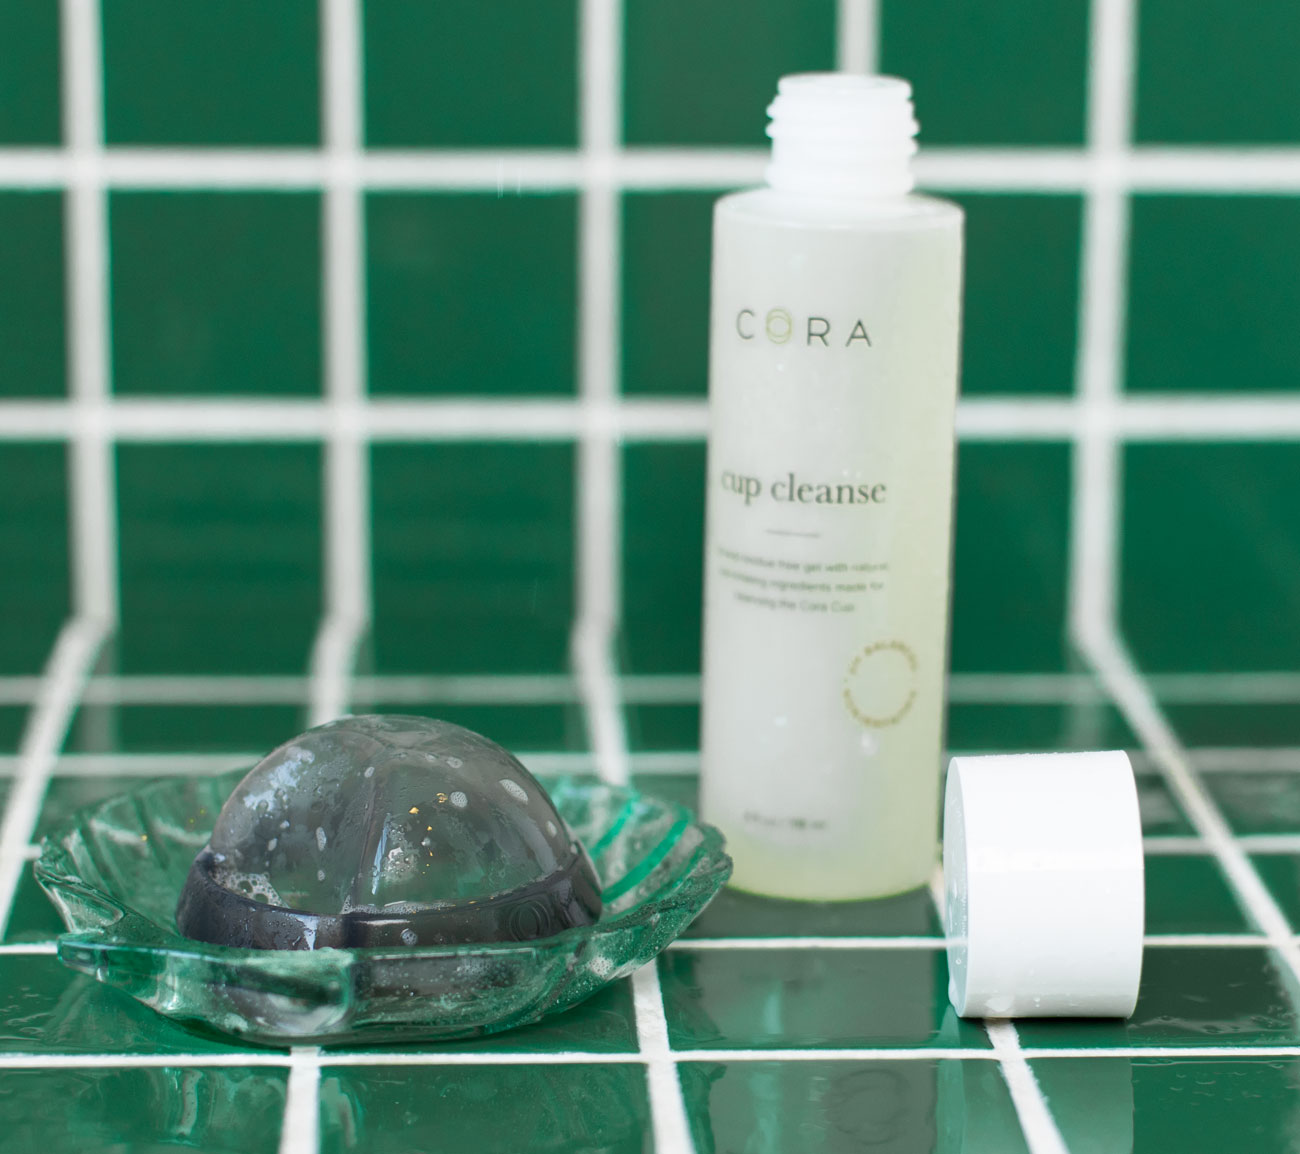 cora menstrual disc and cora cup cleanser on green tile 